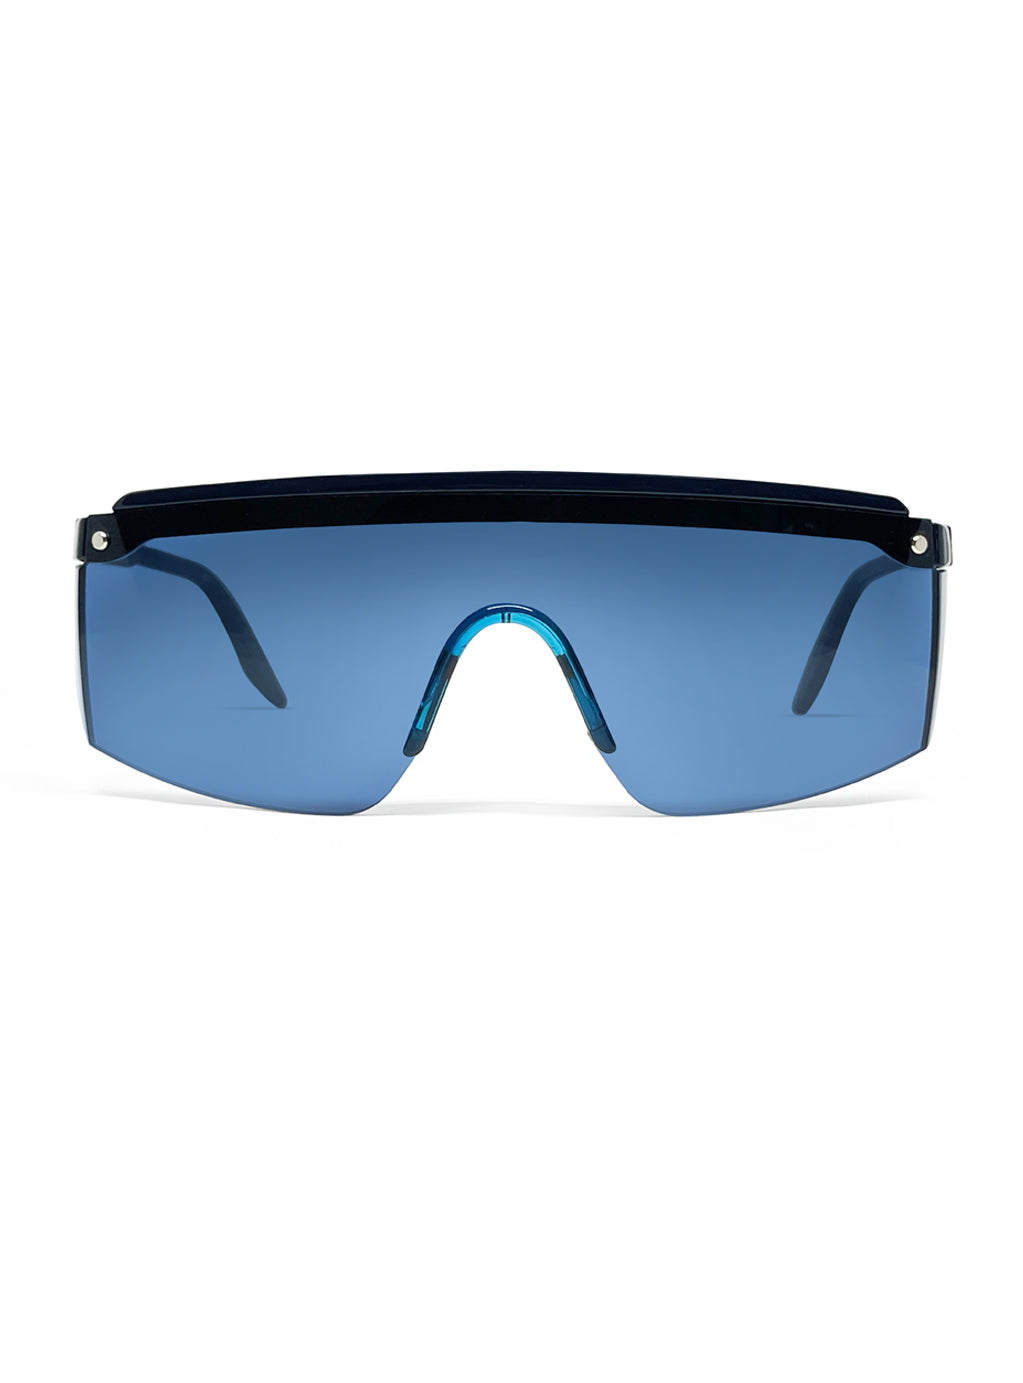 Broad M Blue with Blue Lenses